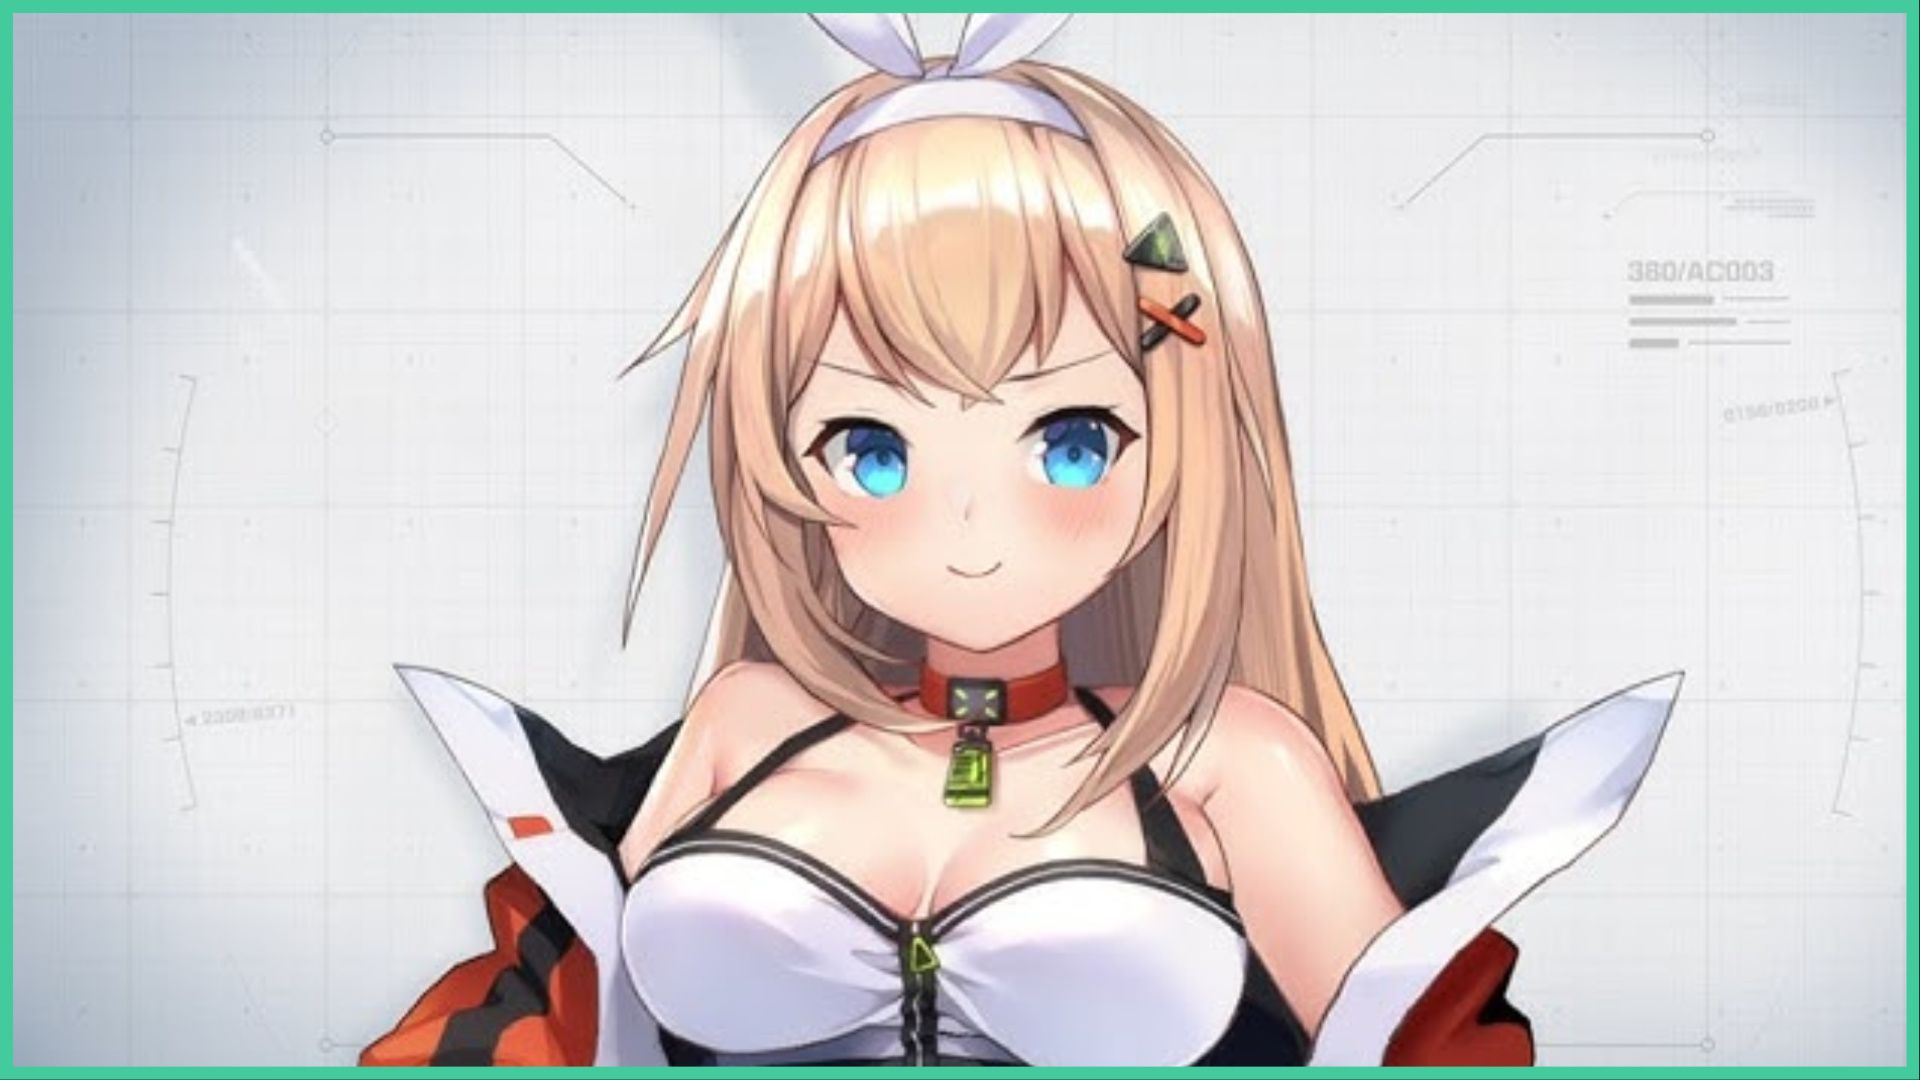 feature image for our ark recode codes guide, the image features promo art of a character from the game as she smiles and furrows her eyebrows, she has a headband in her hair that looks like rabbit ears